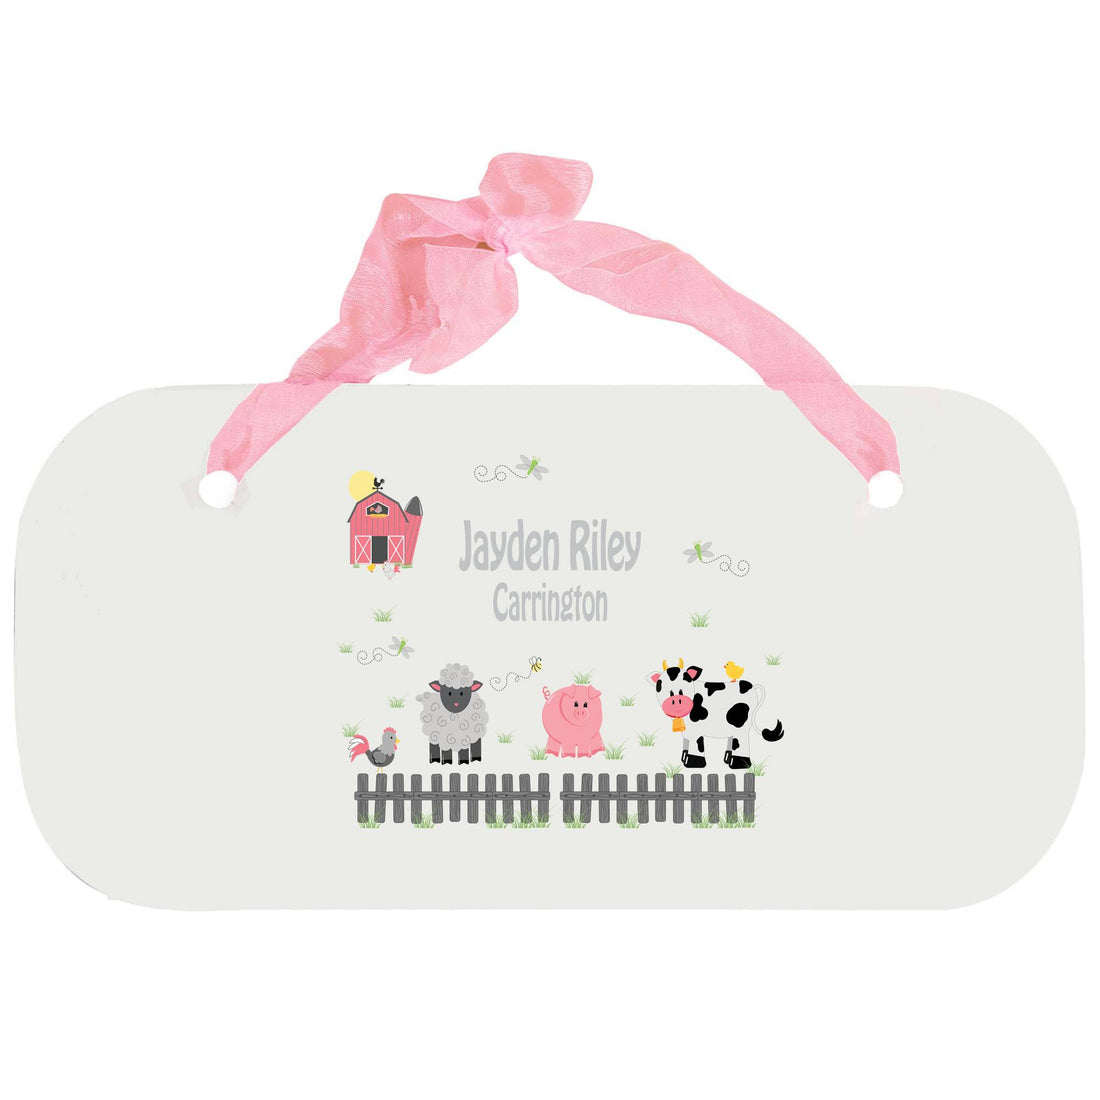 Personalized Girls Wall Plaque with Barnyard Friends Pastel design